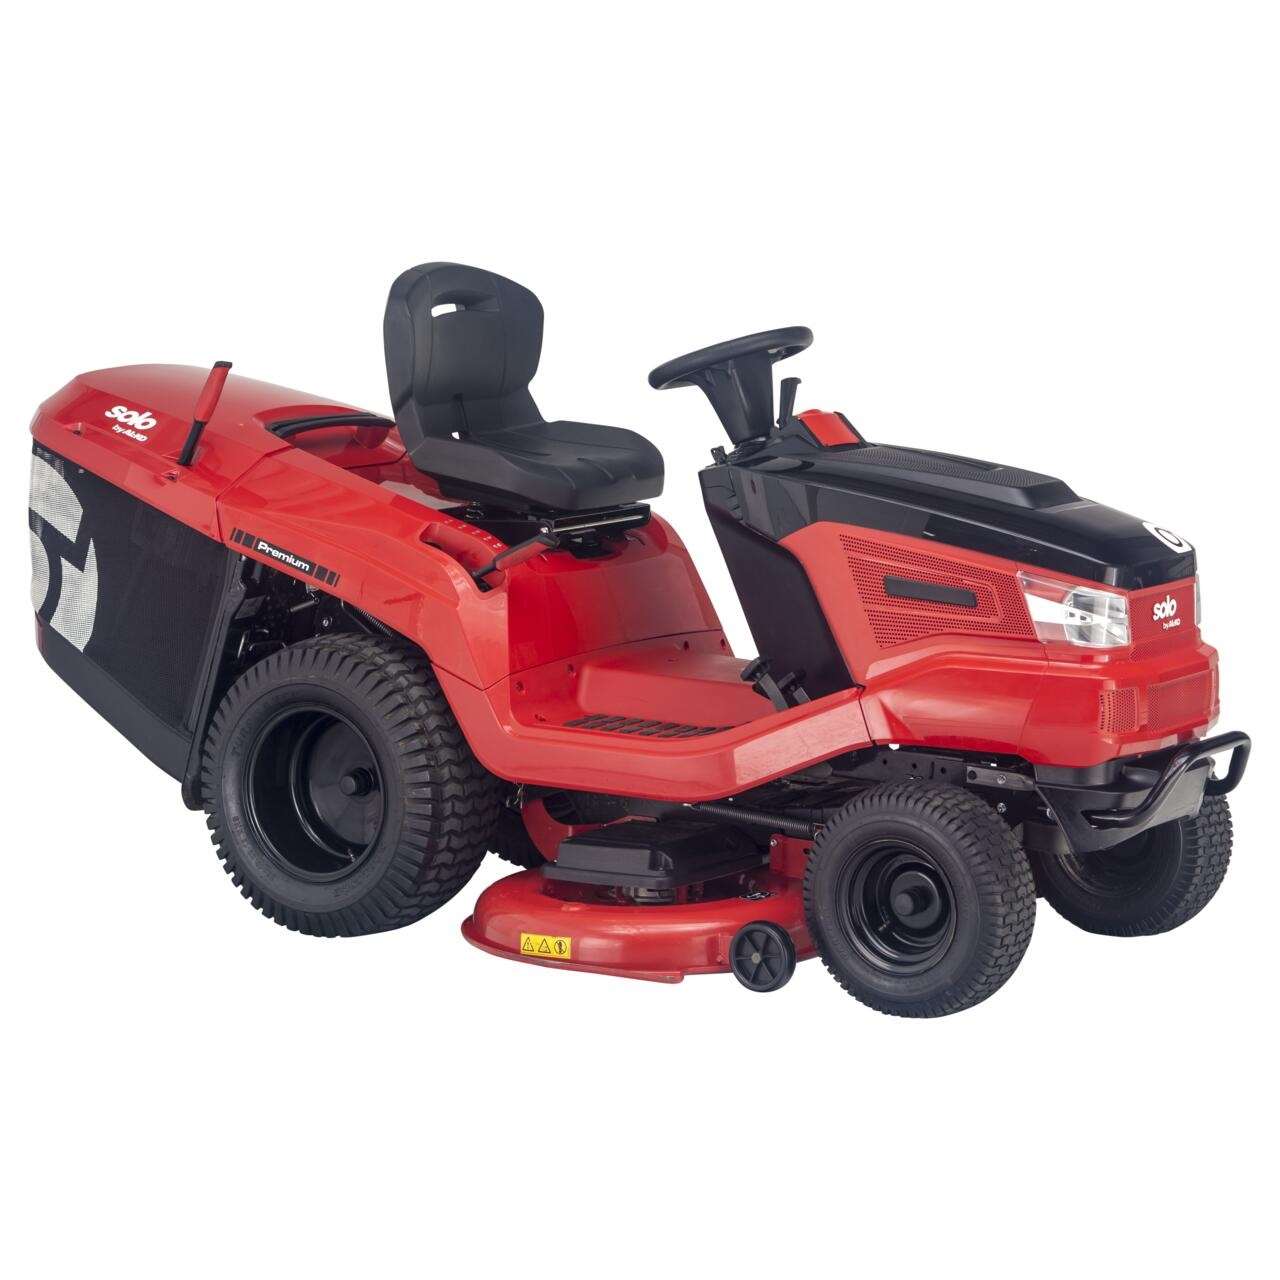 127693-tractor-t22-105-3-hd-v2-sd-webshop-1